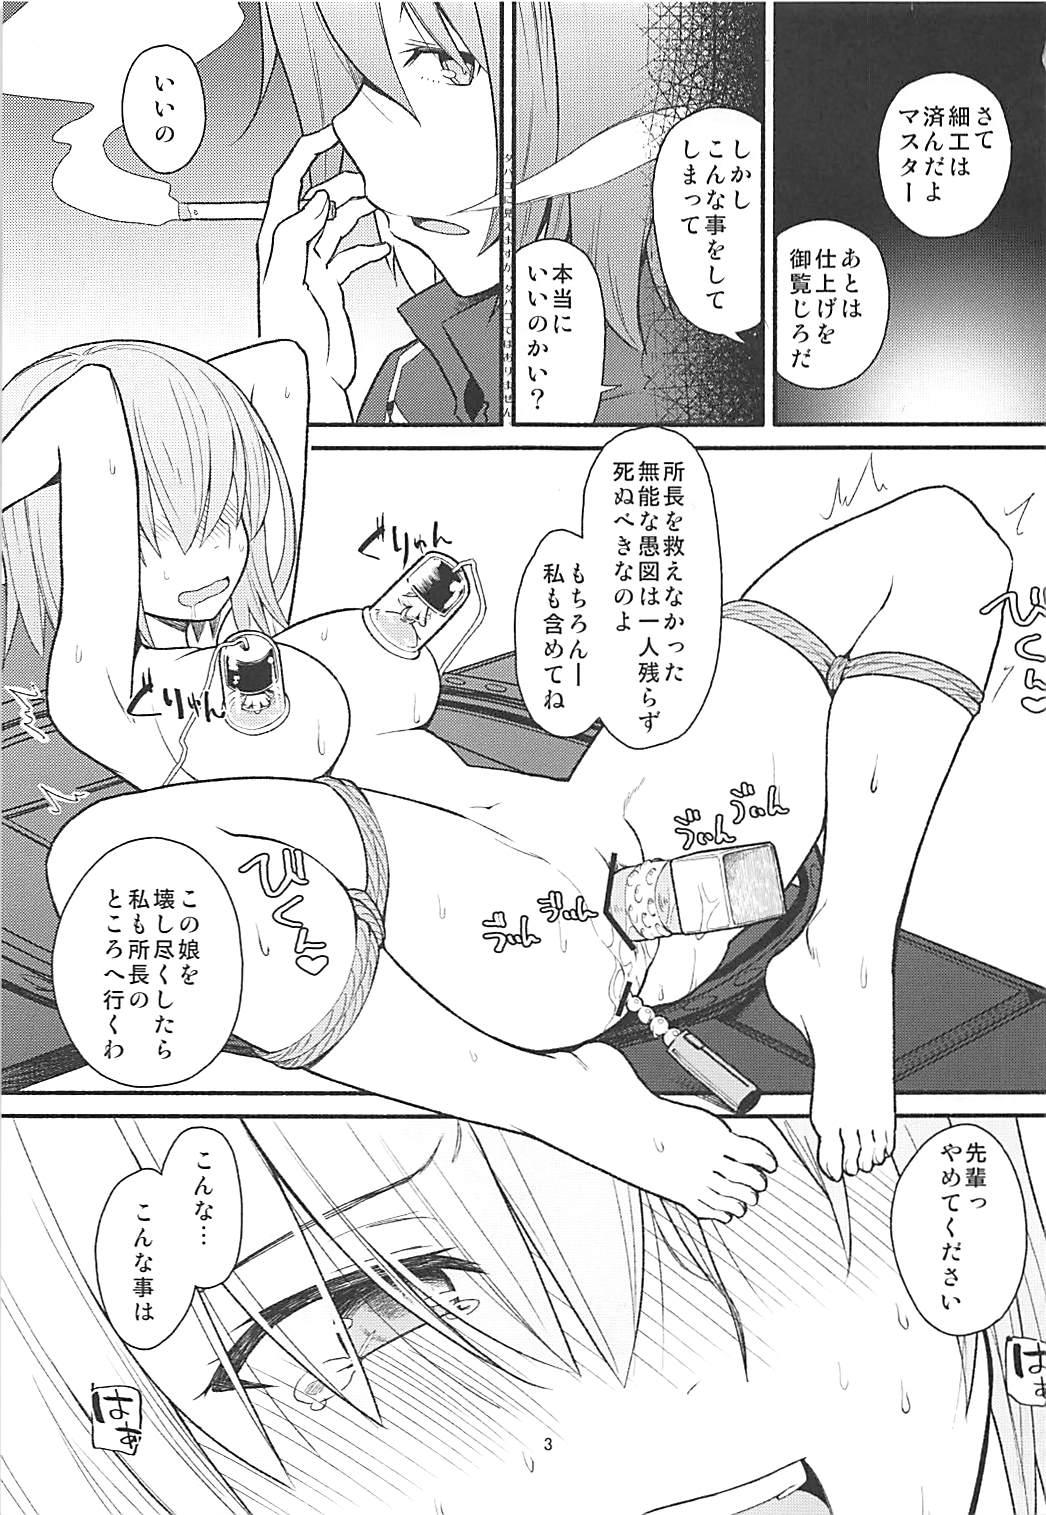 Porno 18 Tsumeawase - Fate grand order Blows - Page 2